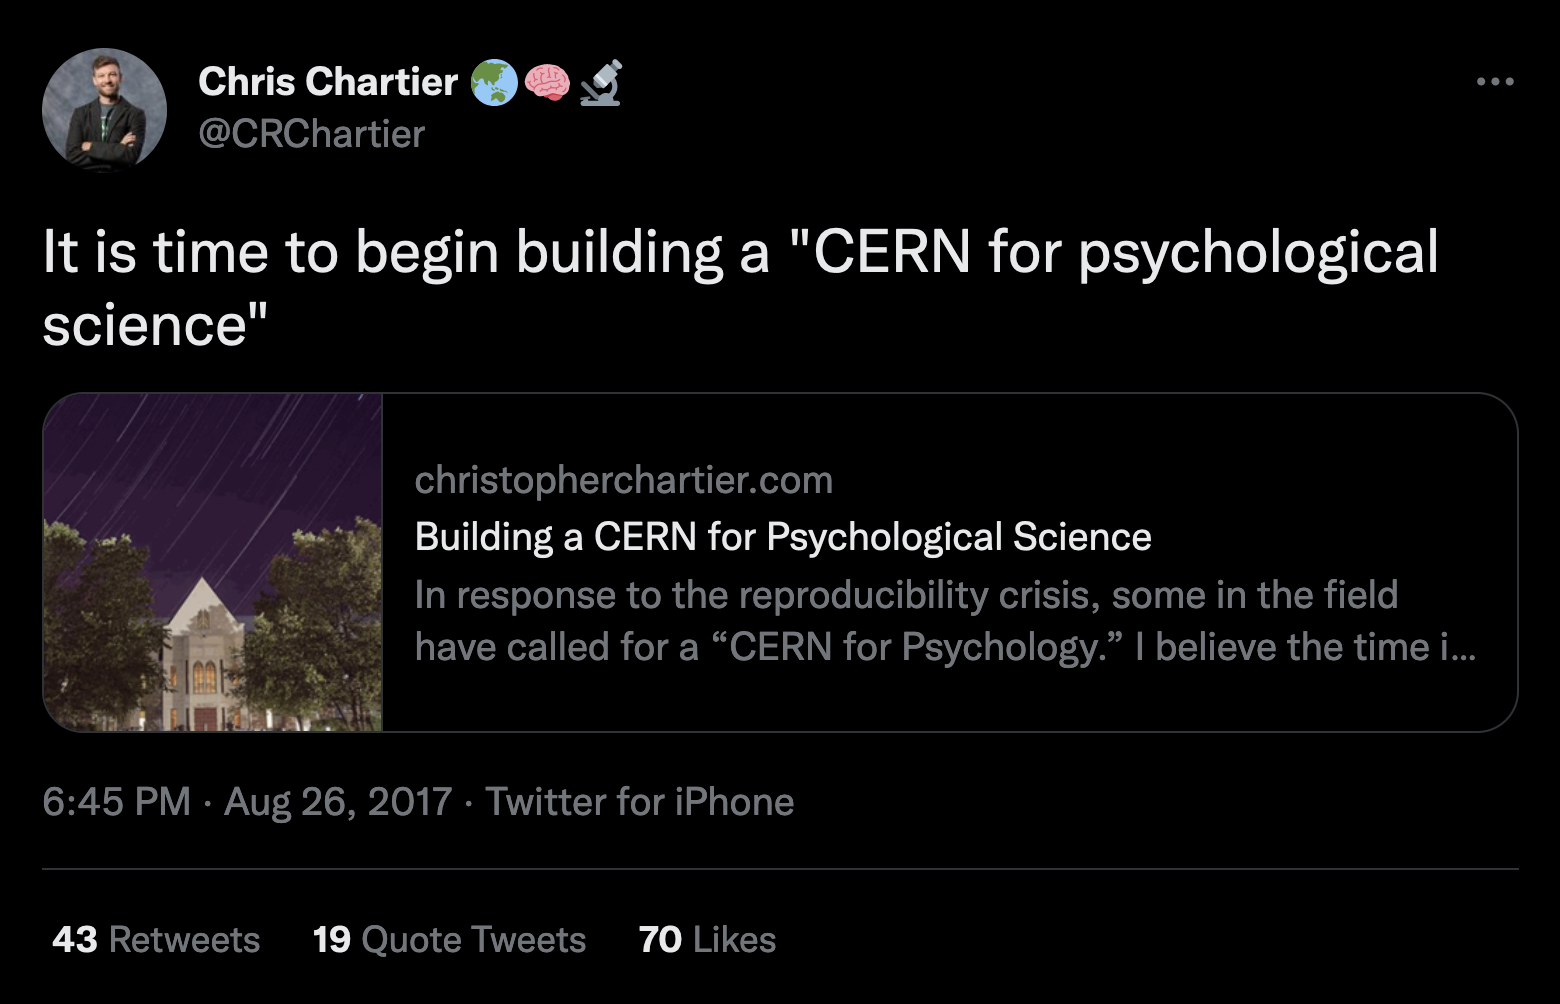 Tweet from Chris Chartier: It's time to begin building a CERN for Psychological Science